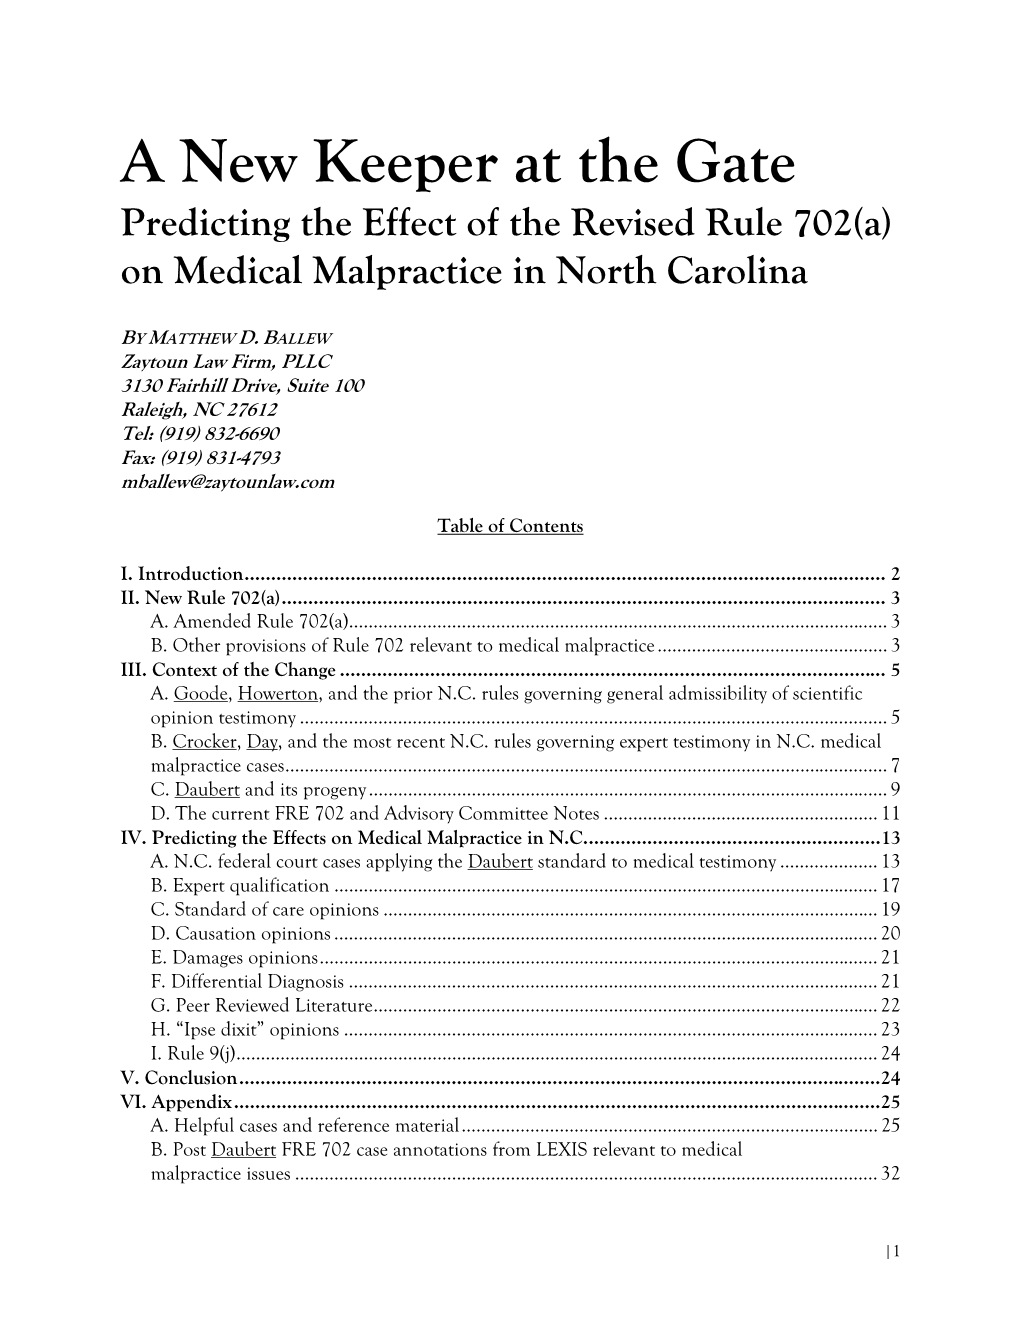 A New Keeper at the Gate Predicting the Effect of the Revised Rule 702(A) on Medical Malpractice in North Carolina